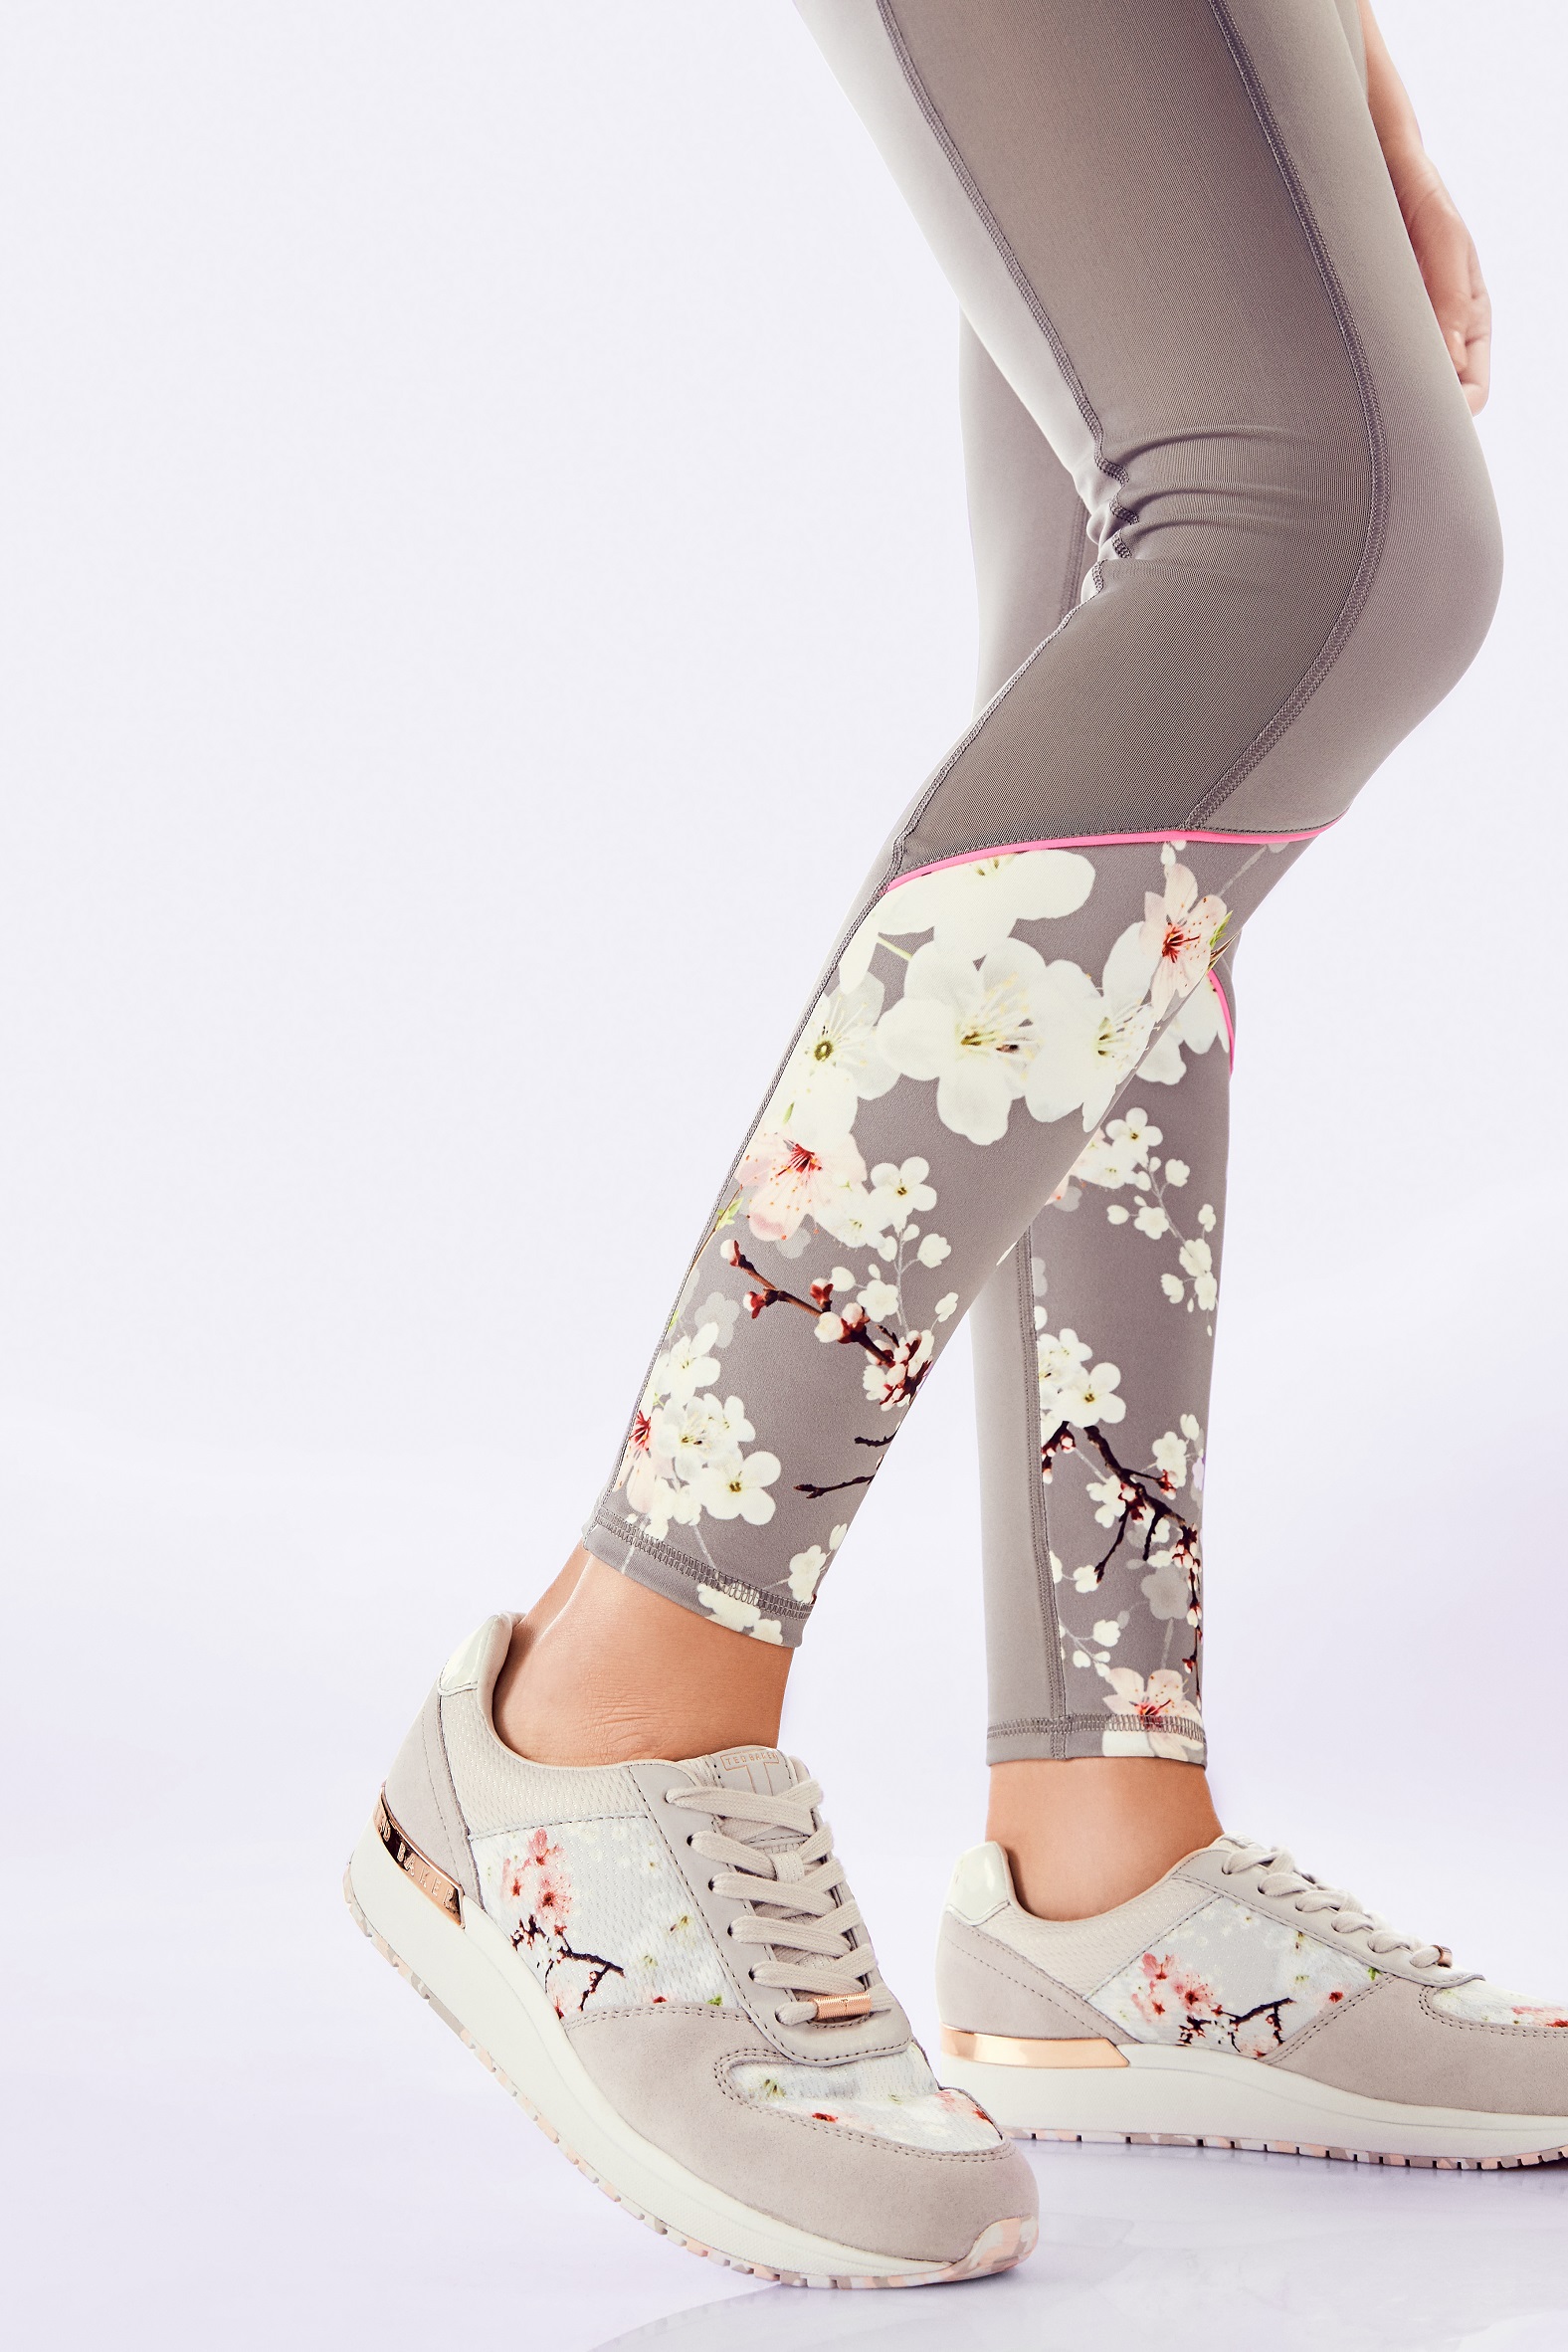 TED BAKER WOMEN'S FITNESS LEGGINGS CROPPED GREY PINK FLORAL FIT TO A T  SMALL | eBay